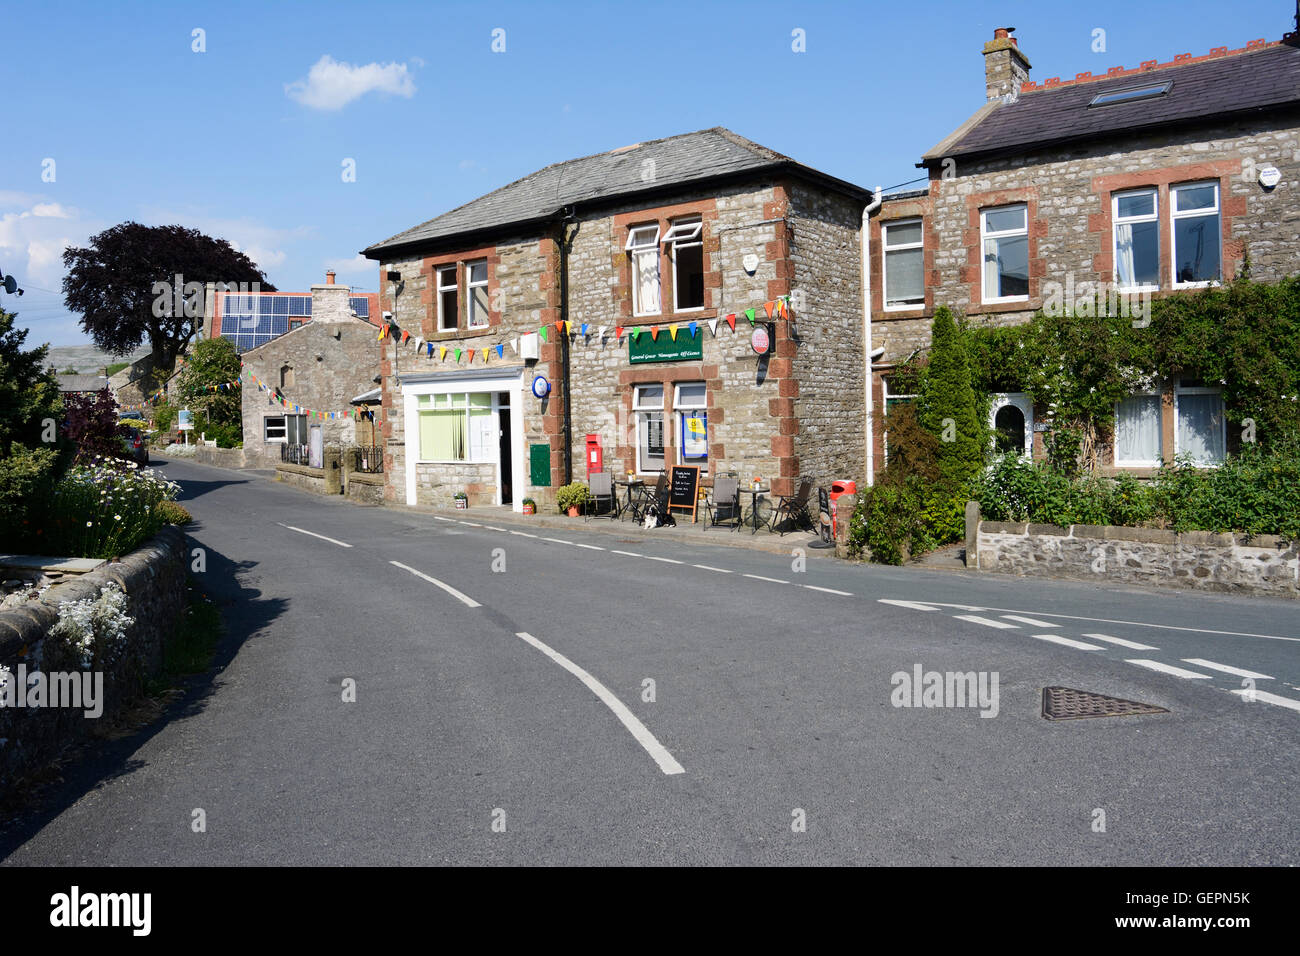 The small village of Austwick in North Yorkshire in the Yorkshire Dales National Park. Stock Photo